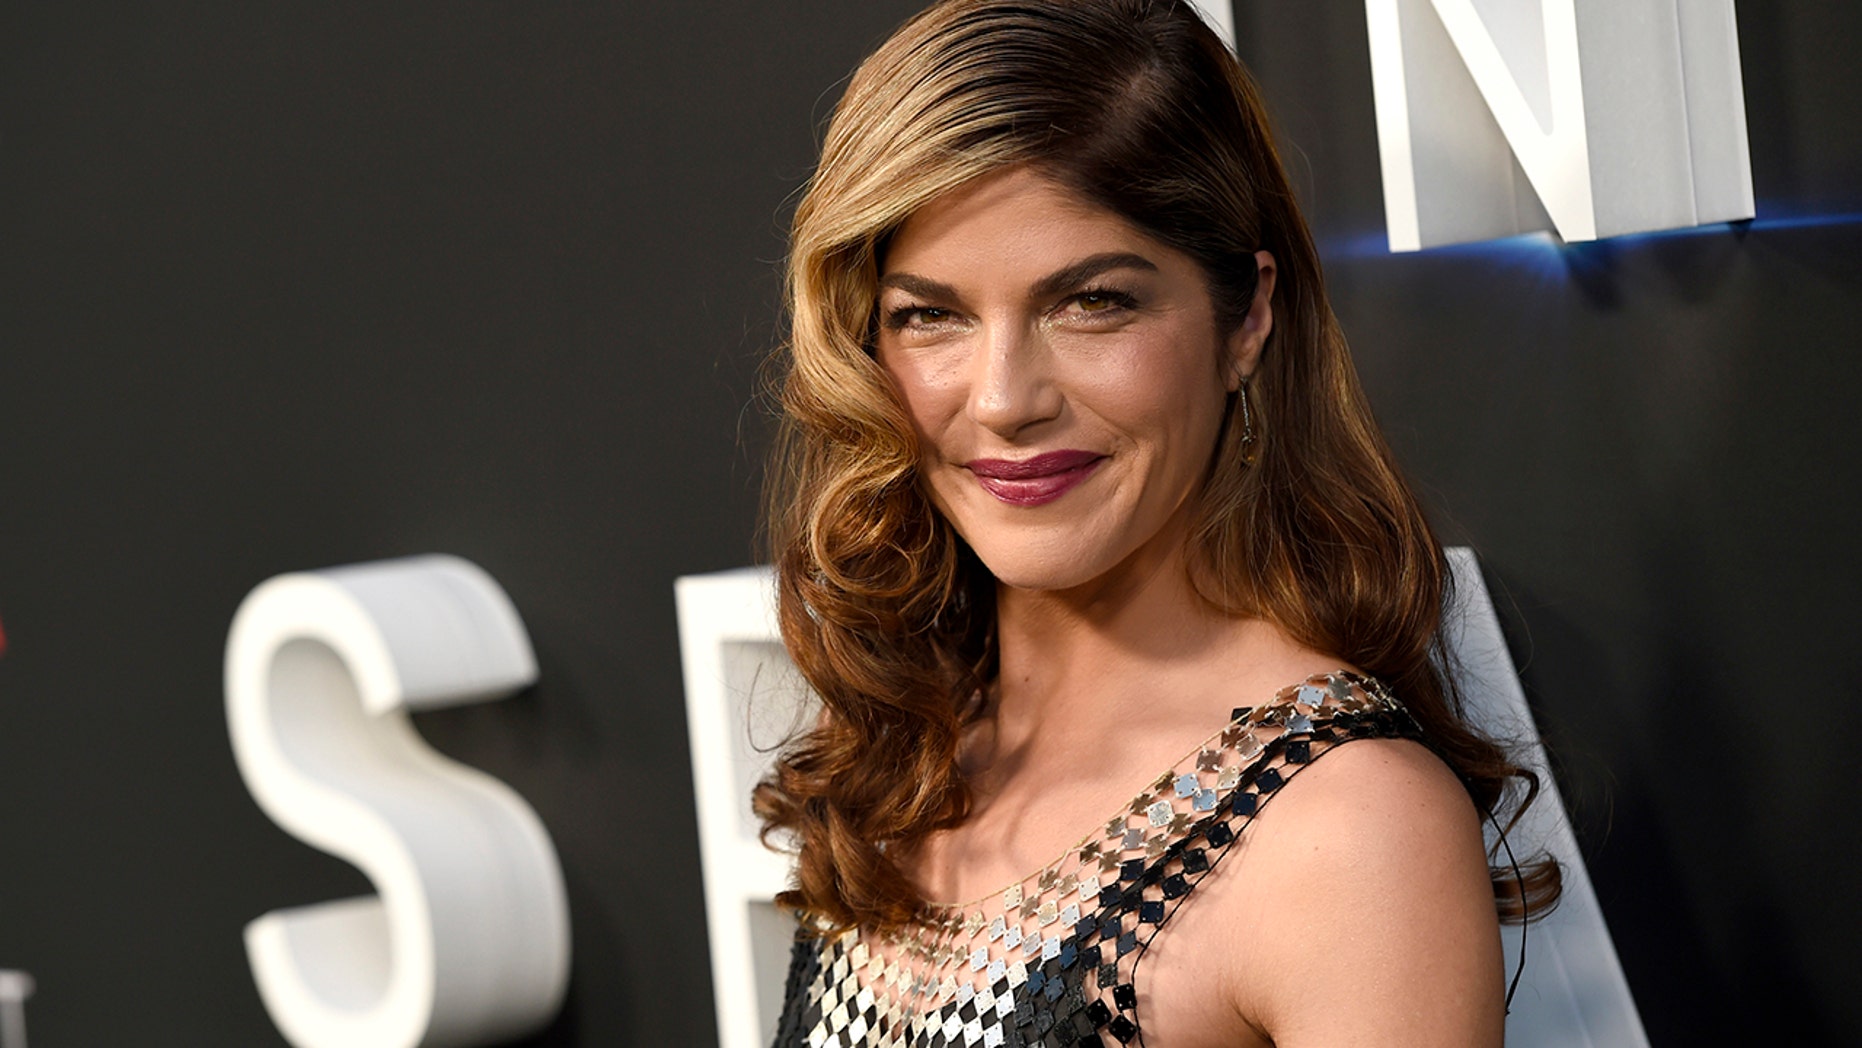 Selma Blair revealed Saturday her diagnosis of MS and the difficulties she faces.